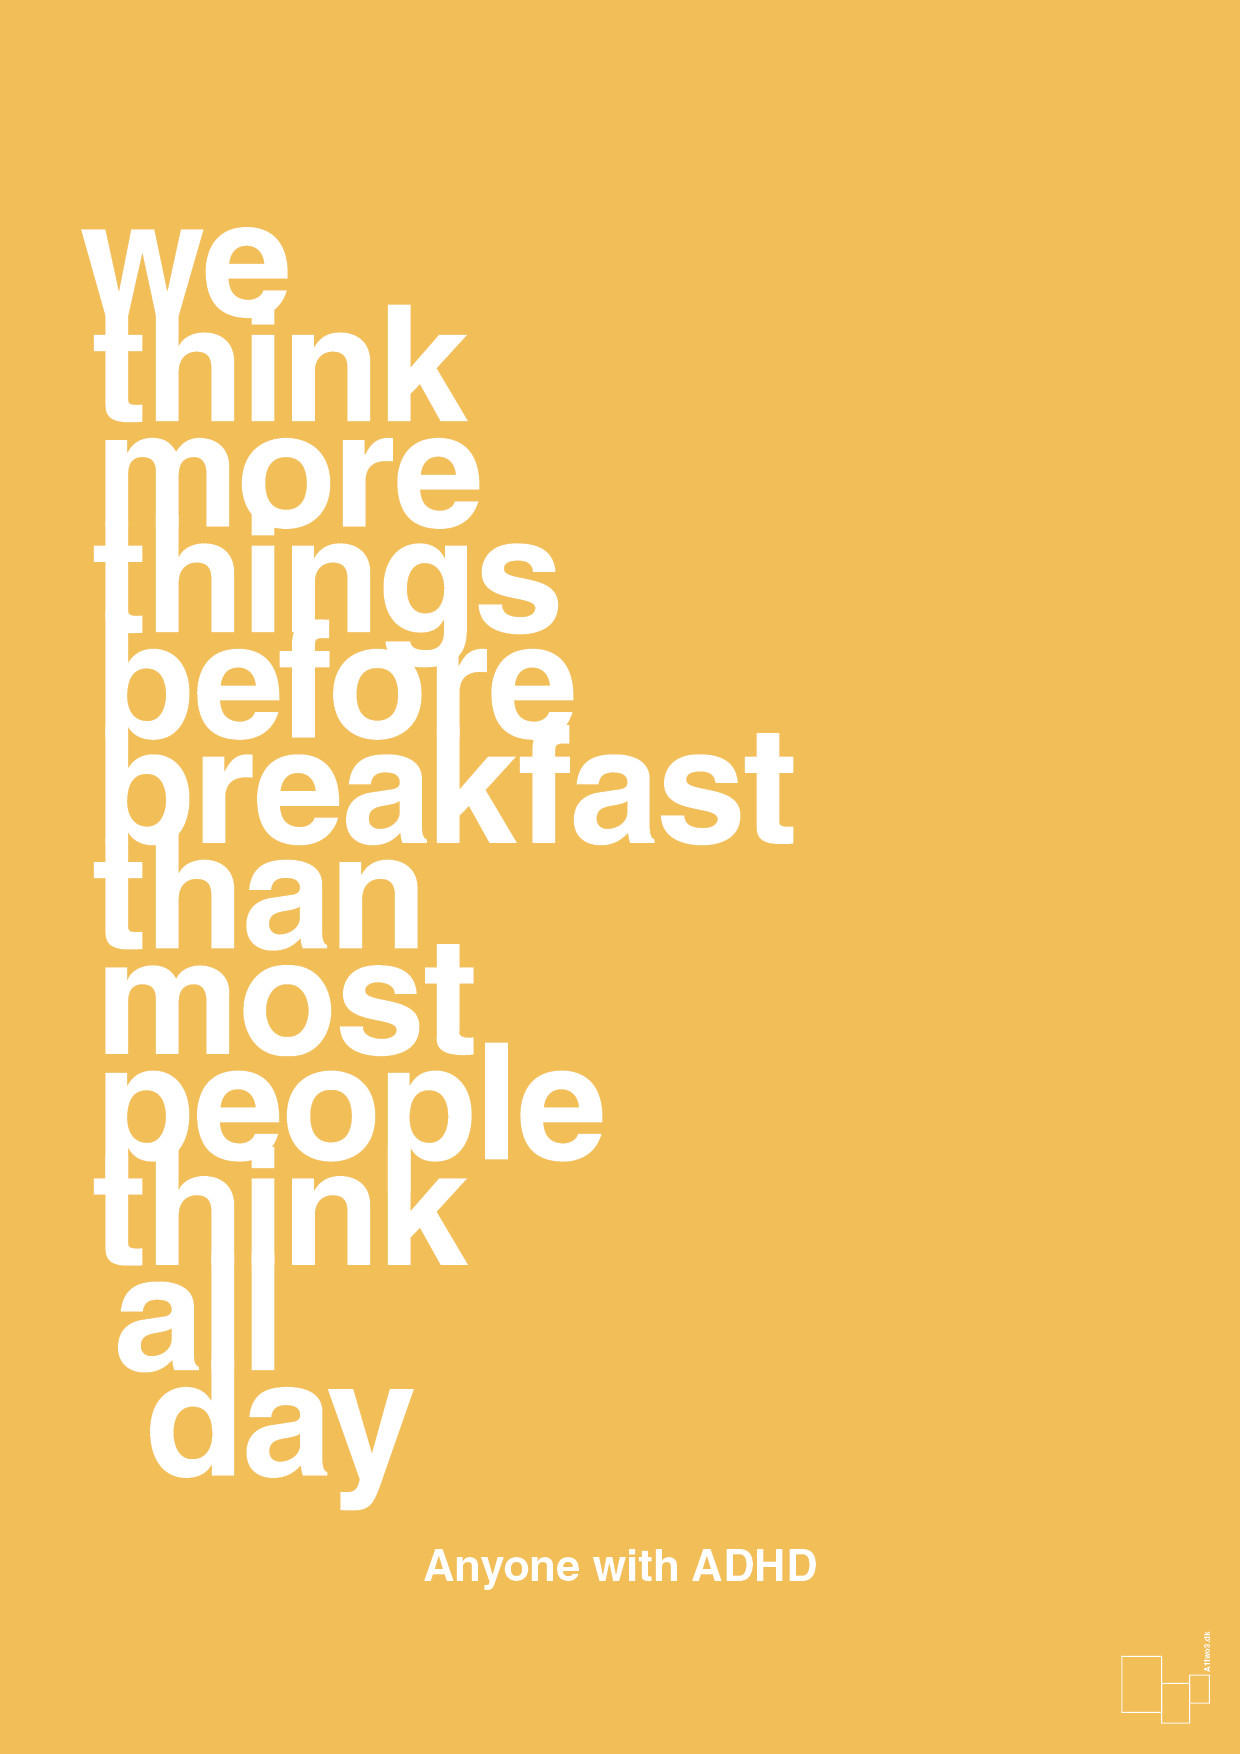 we think more things before breakfast than most people think all day - Plakat med Samfund i Honeycomb